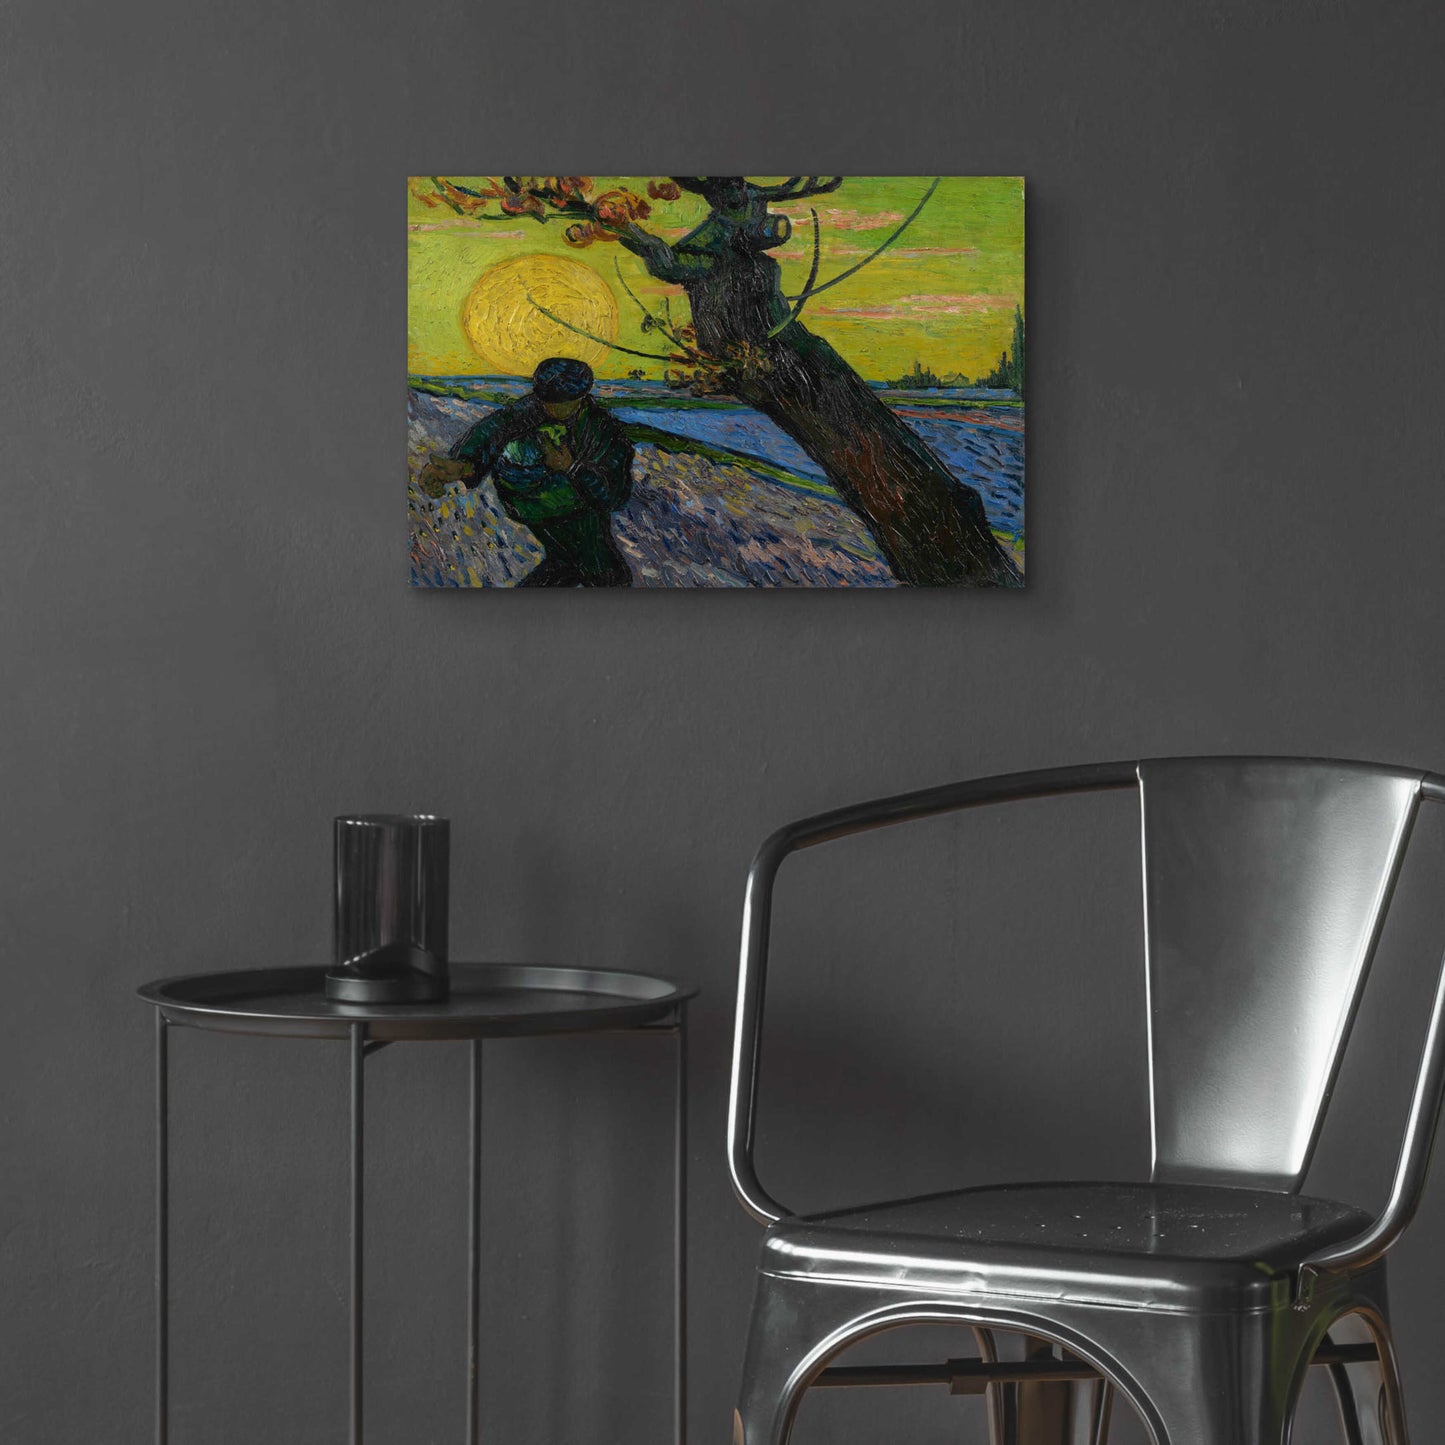 Epic Art 'The Sower' by Vincent Van Gogh, Acrylic Glass Wall Art,24x16